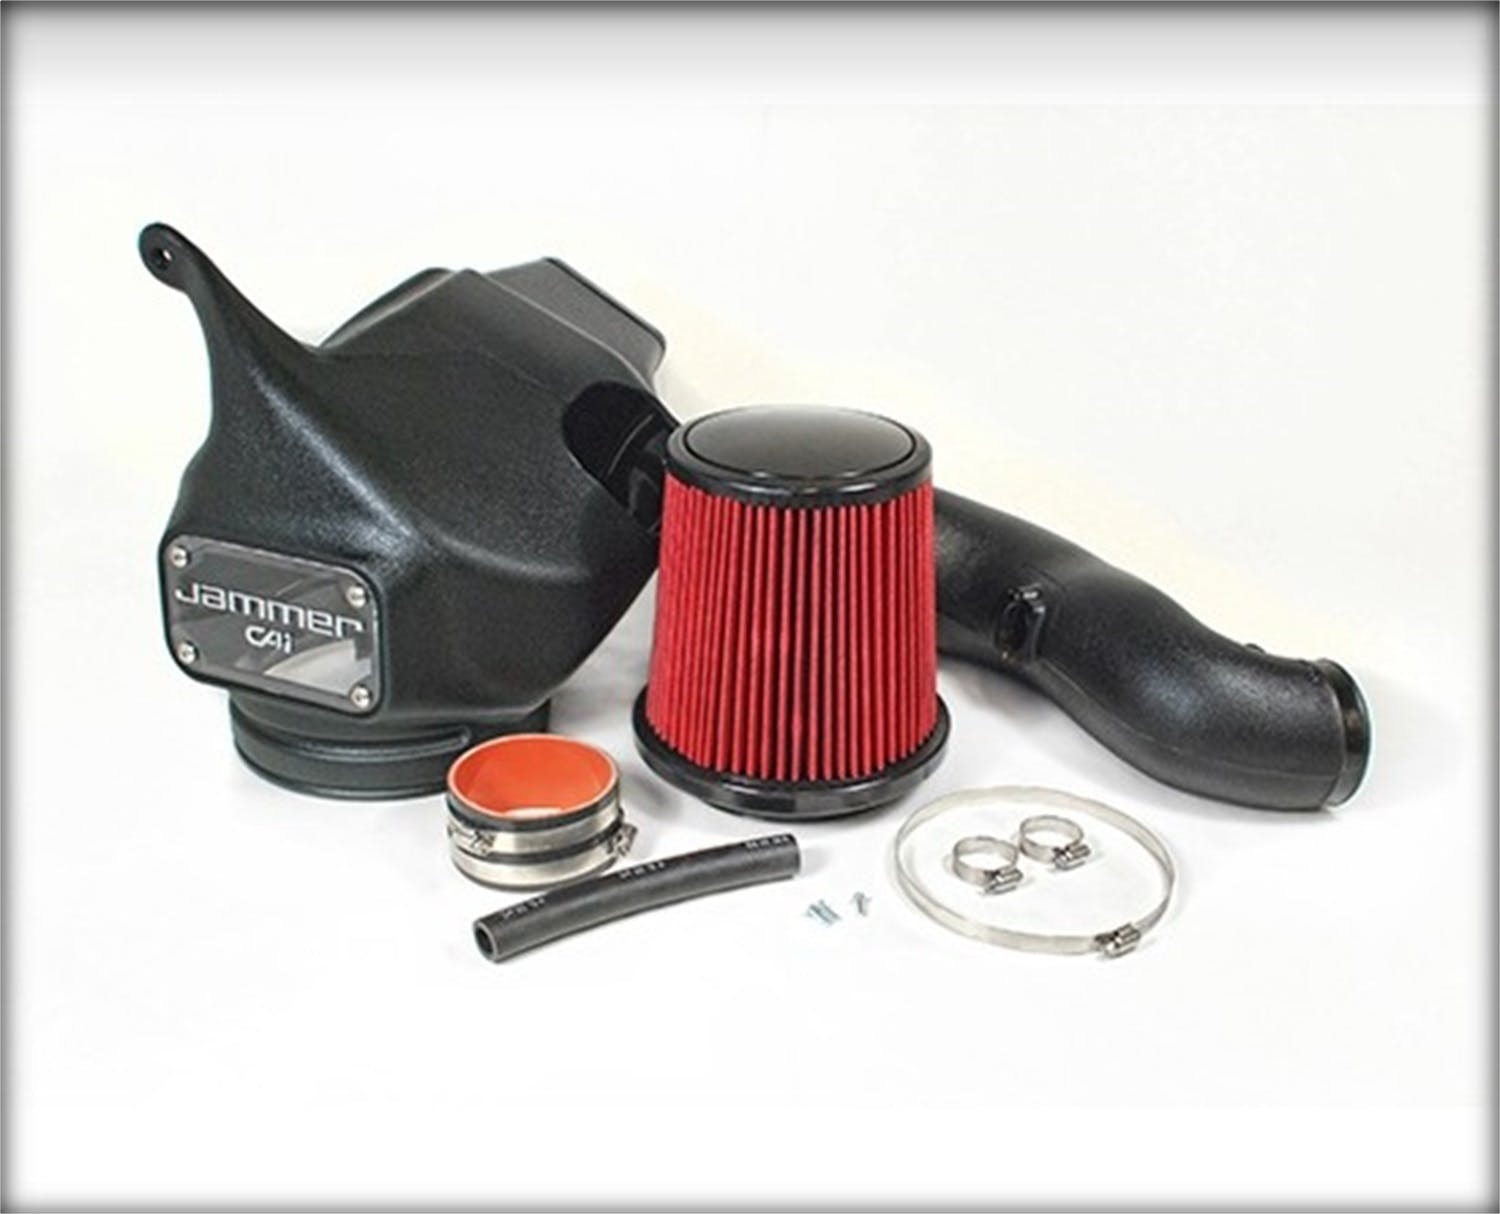 Edge Products 38255 Intake,Jammer,Ram,2013-2017 6.7L